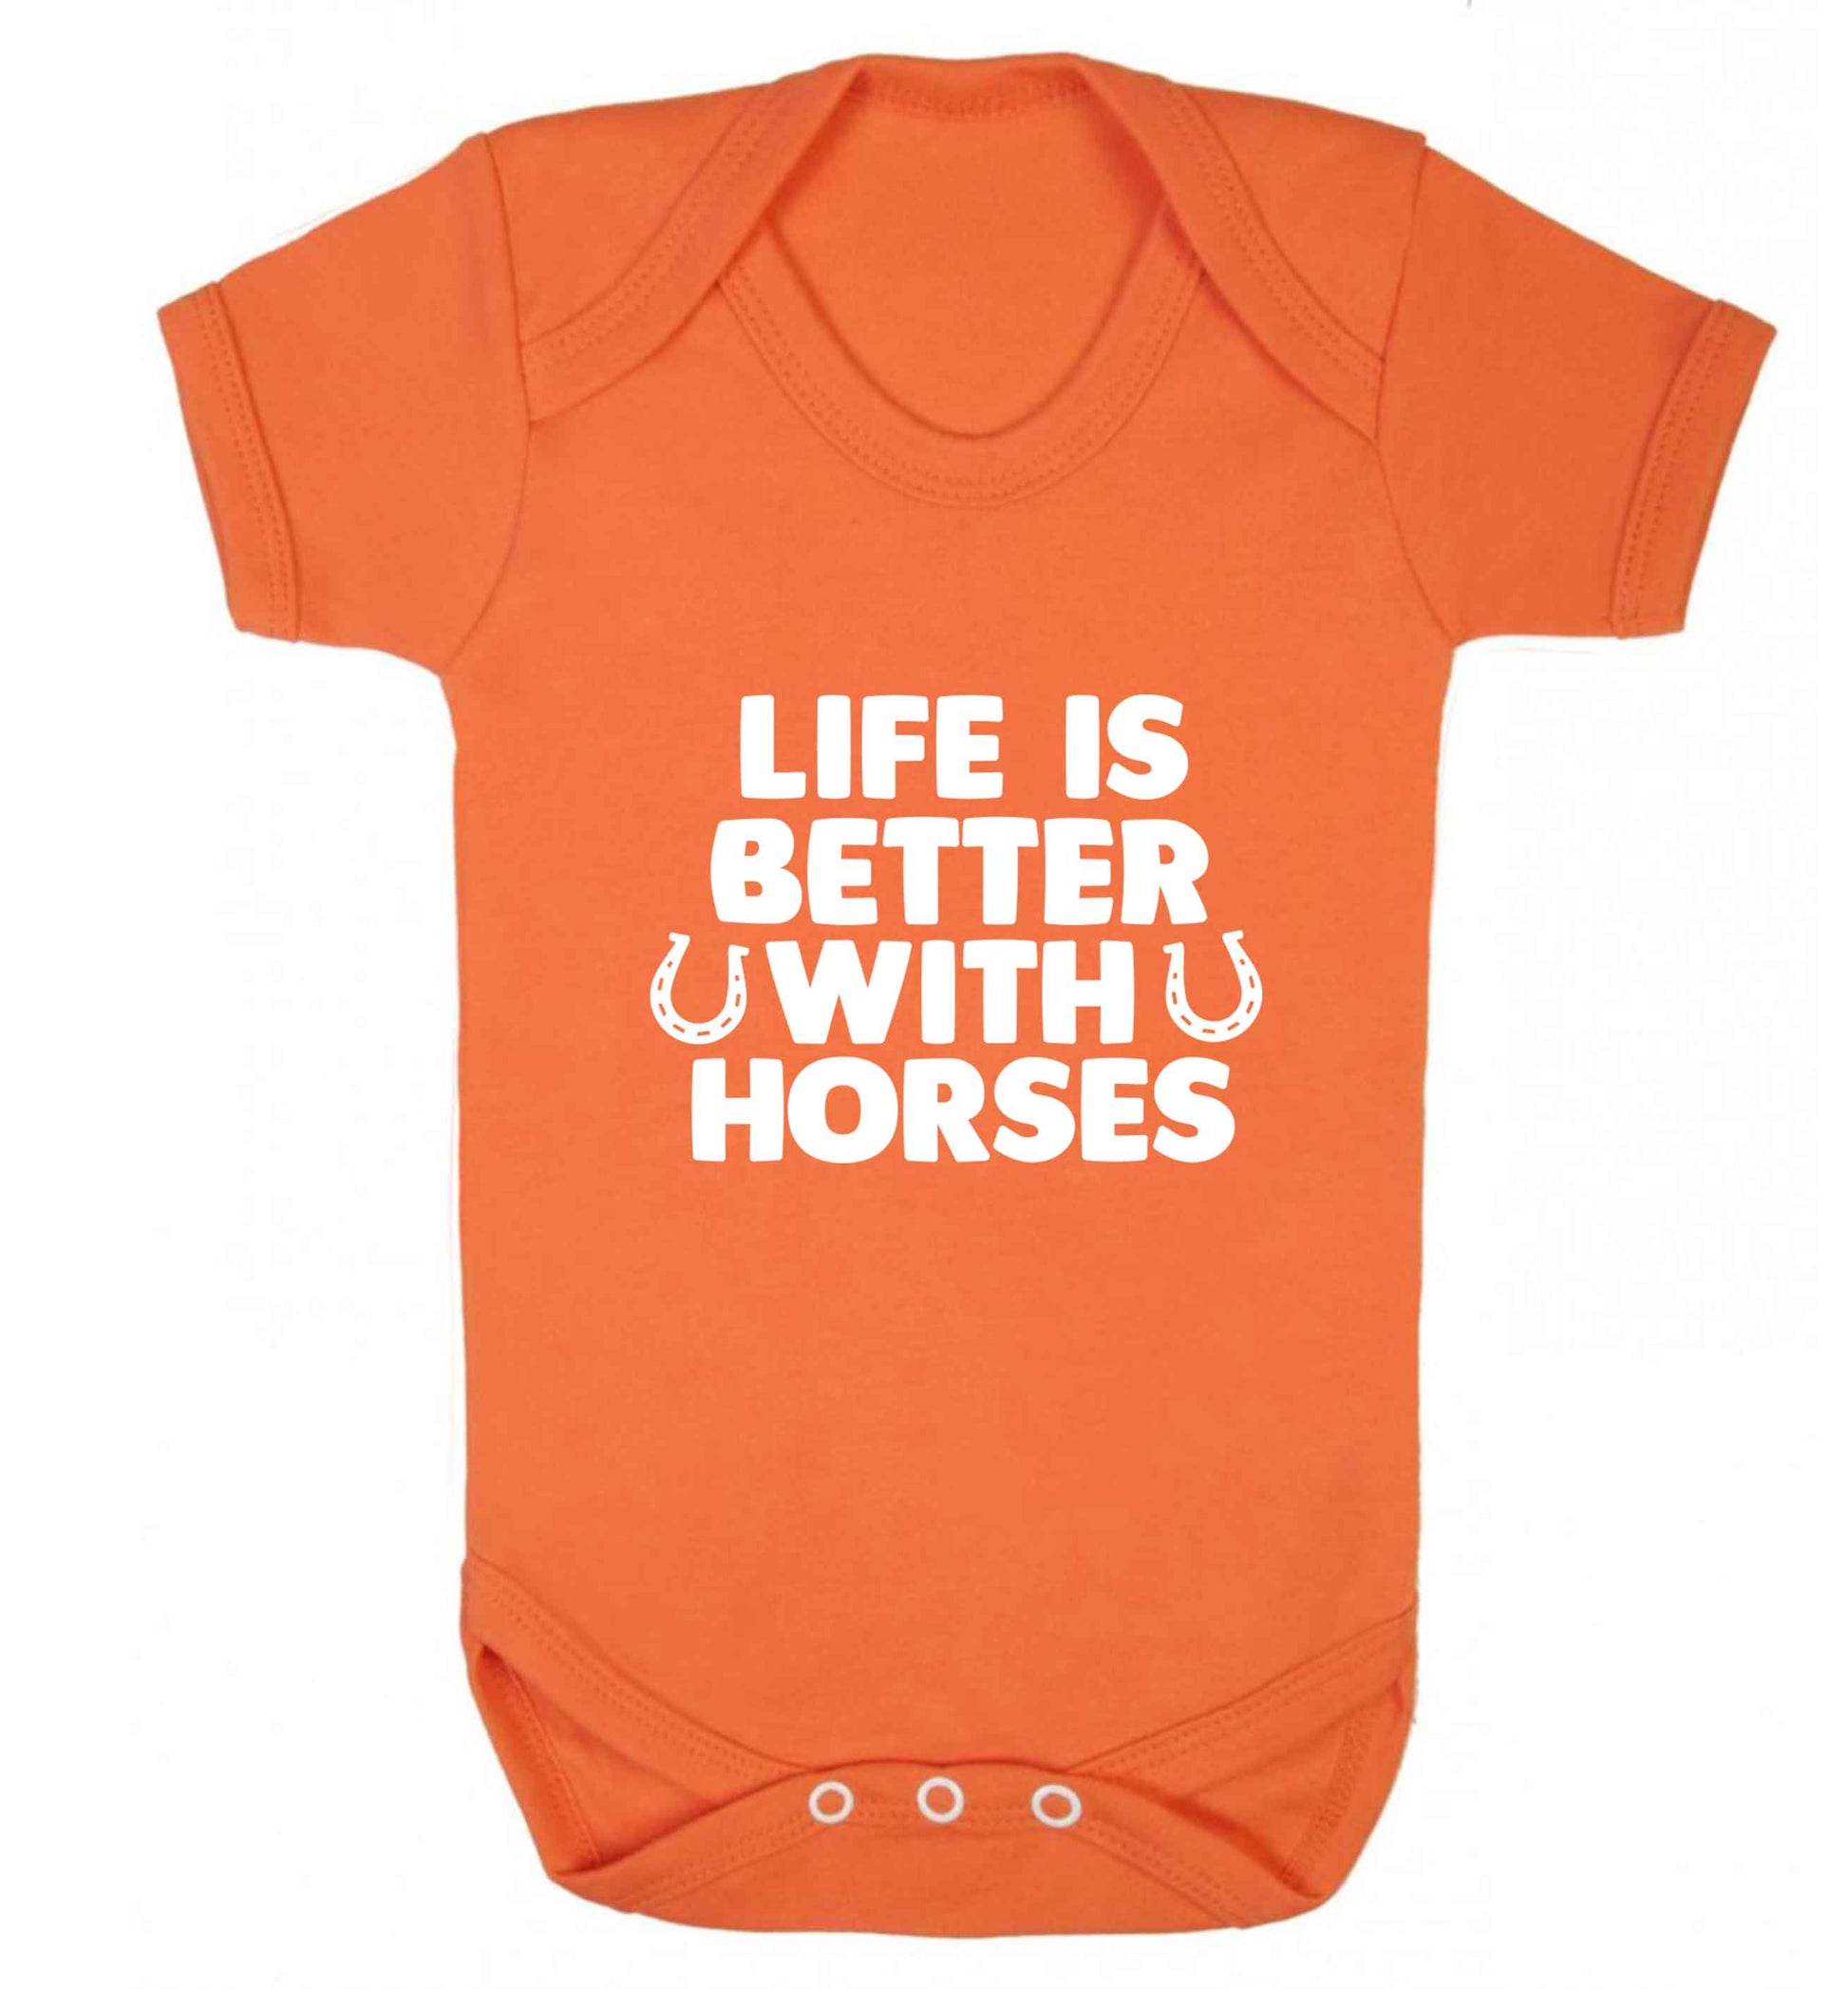 Life is better with horses baby vest orange 18-24 months